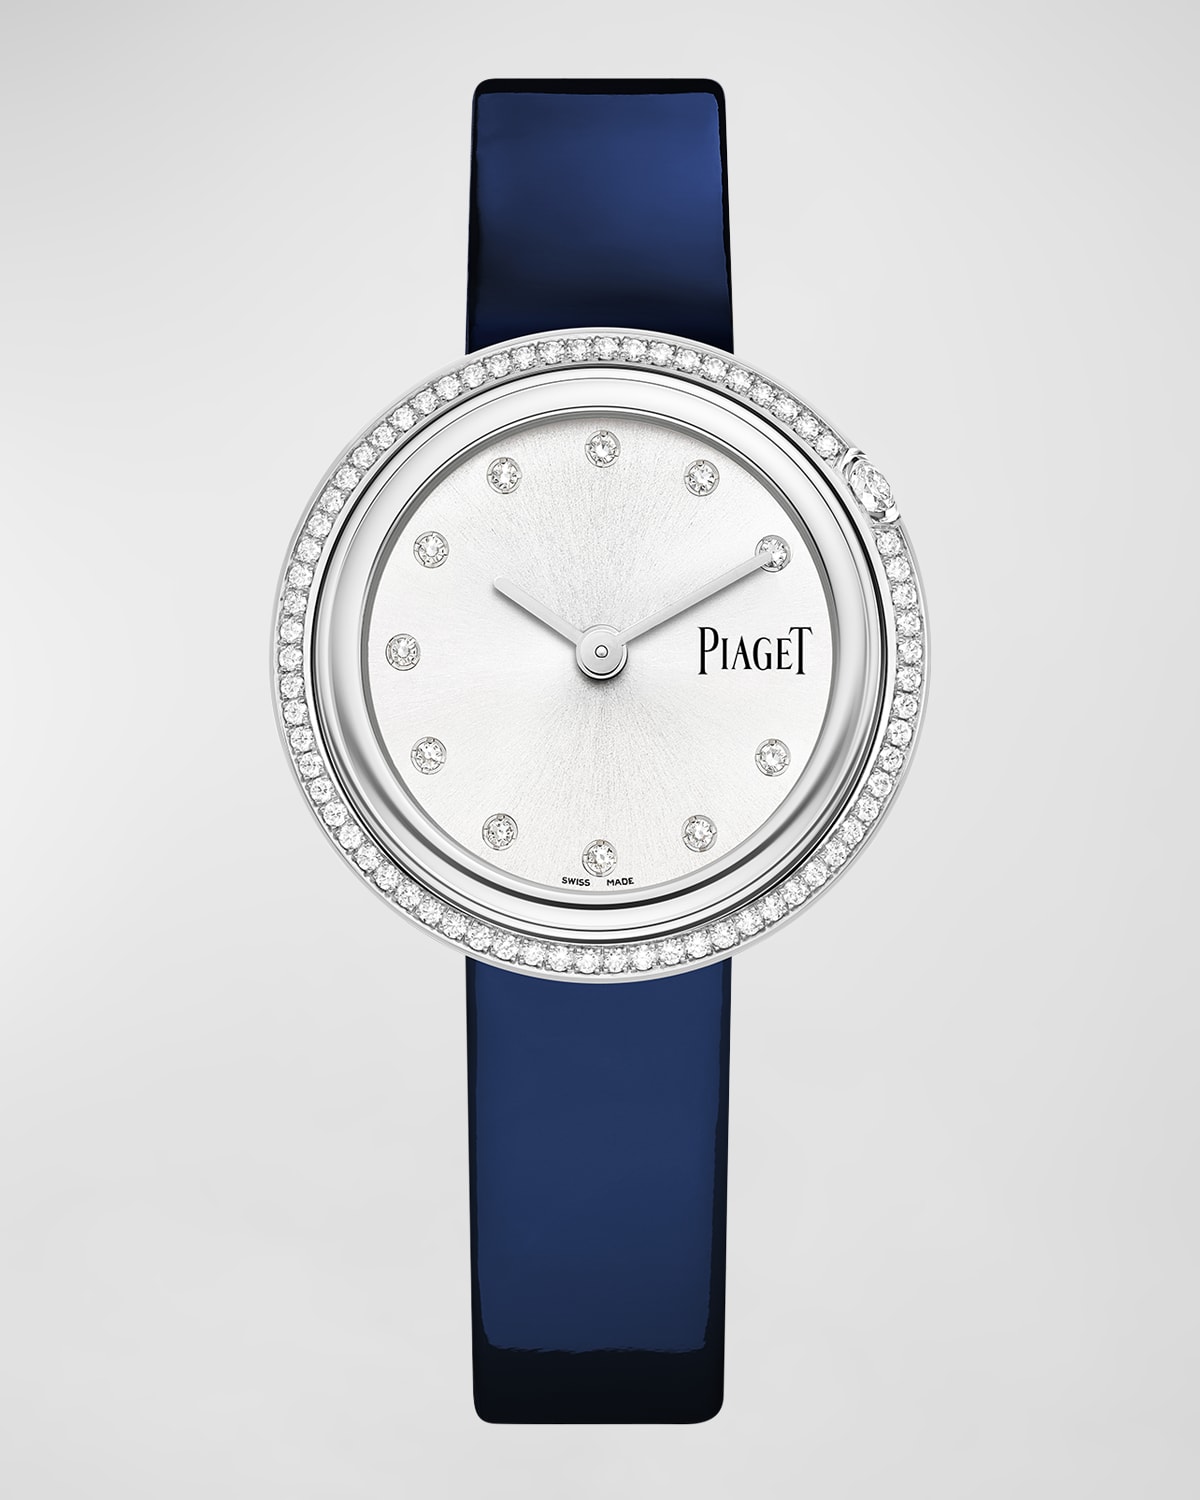 Piaget Possession Diamond Silver Dial Ladies Watch G0a43084 In Red   / Gold / Gold Tone / Silver / White